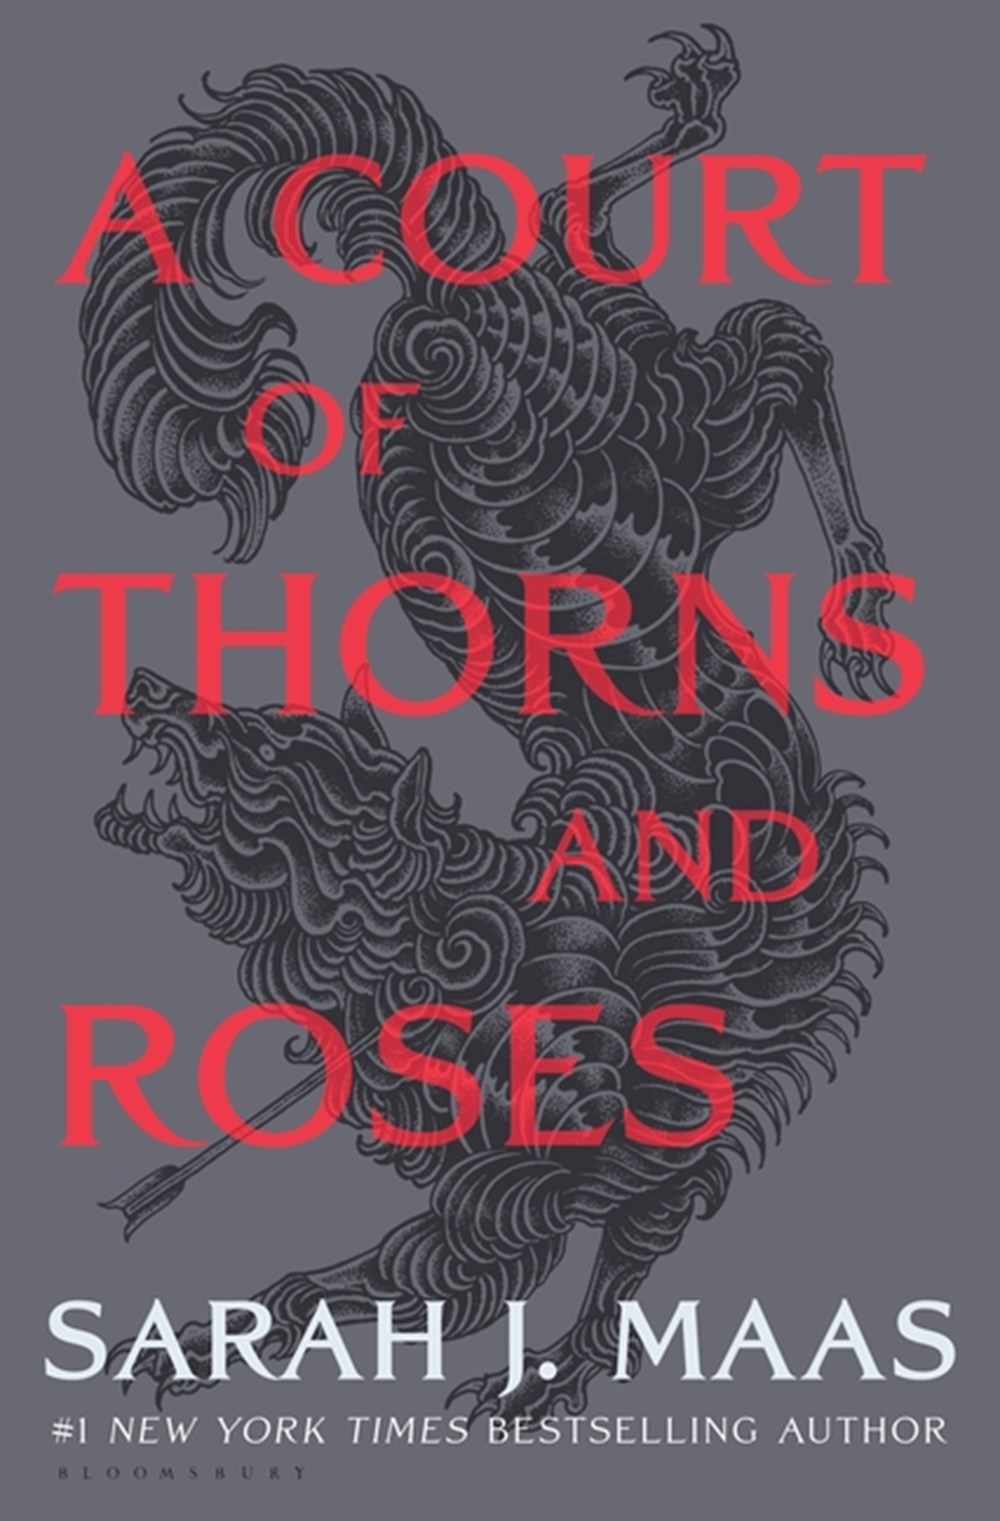 Buy A Court Of Thorns And Roses By Sarah J Maas From Porchlight Book Company